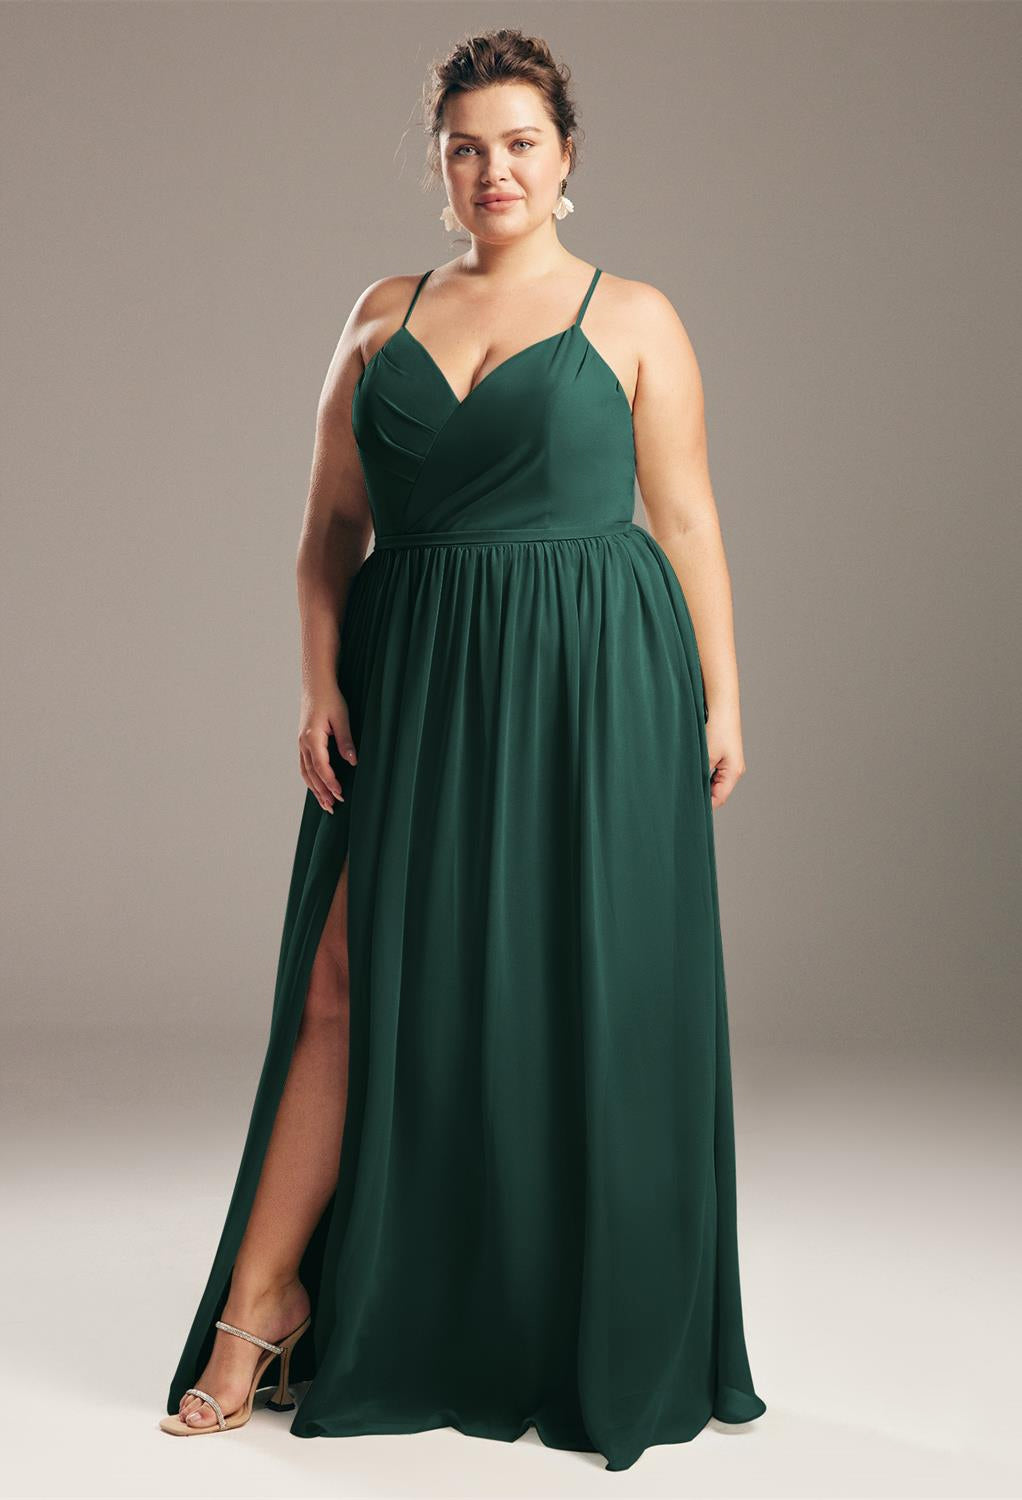 A woman in an elegant green wedding dress stands confidently, looking at the camera with one hand on her hip and a slight smile wearing the Bergamot Bridal Wilfreda Chiffon Bridesmaid Dress Off The Rack.